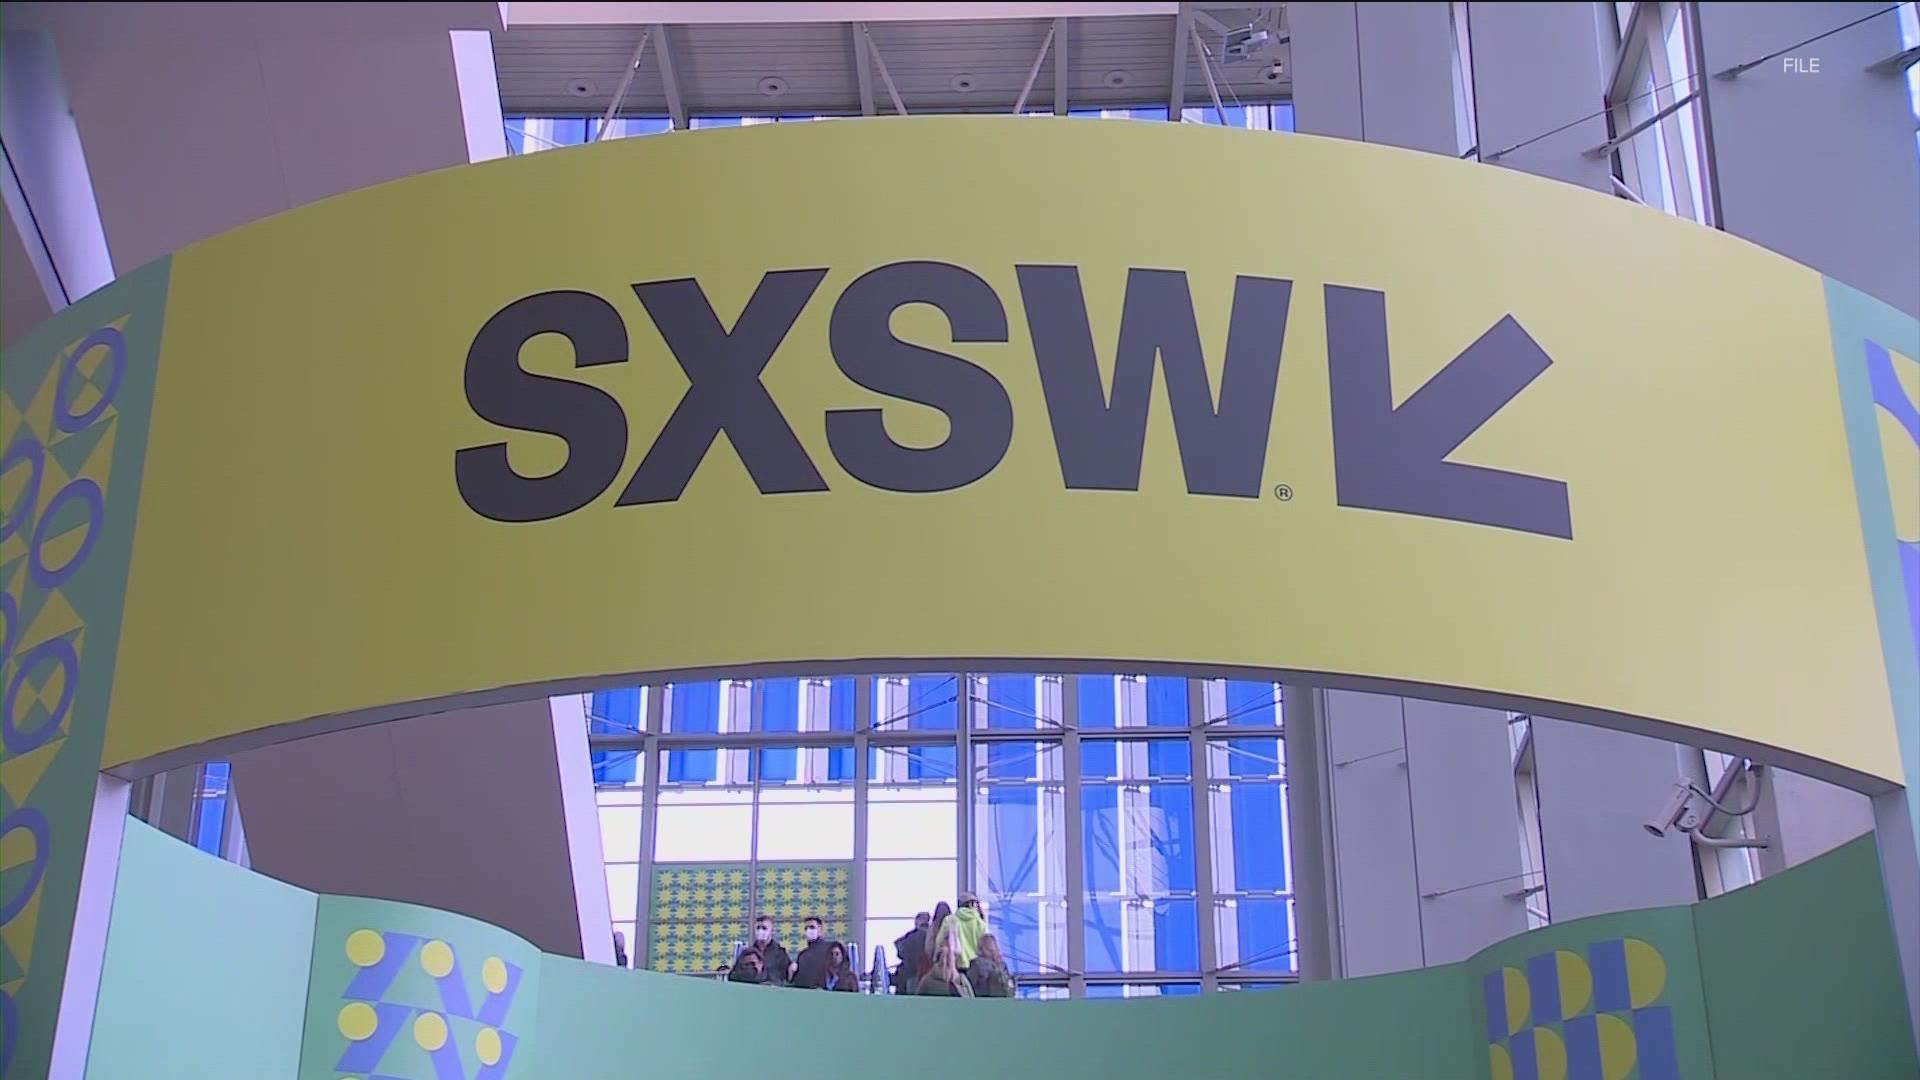 If you want to know what it's like behind the scenes at South by Southwest, the festival is looking for volunteers.